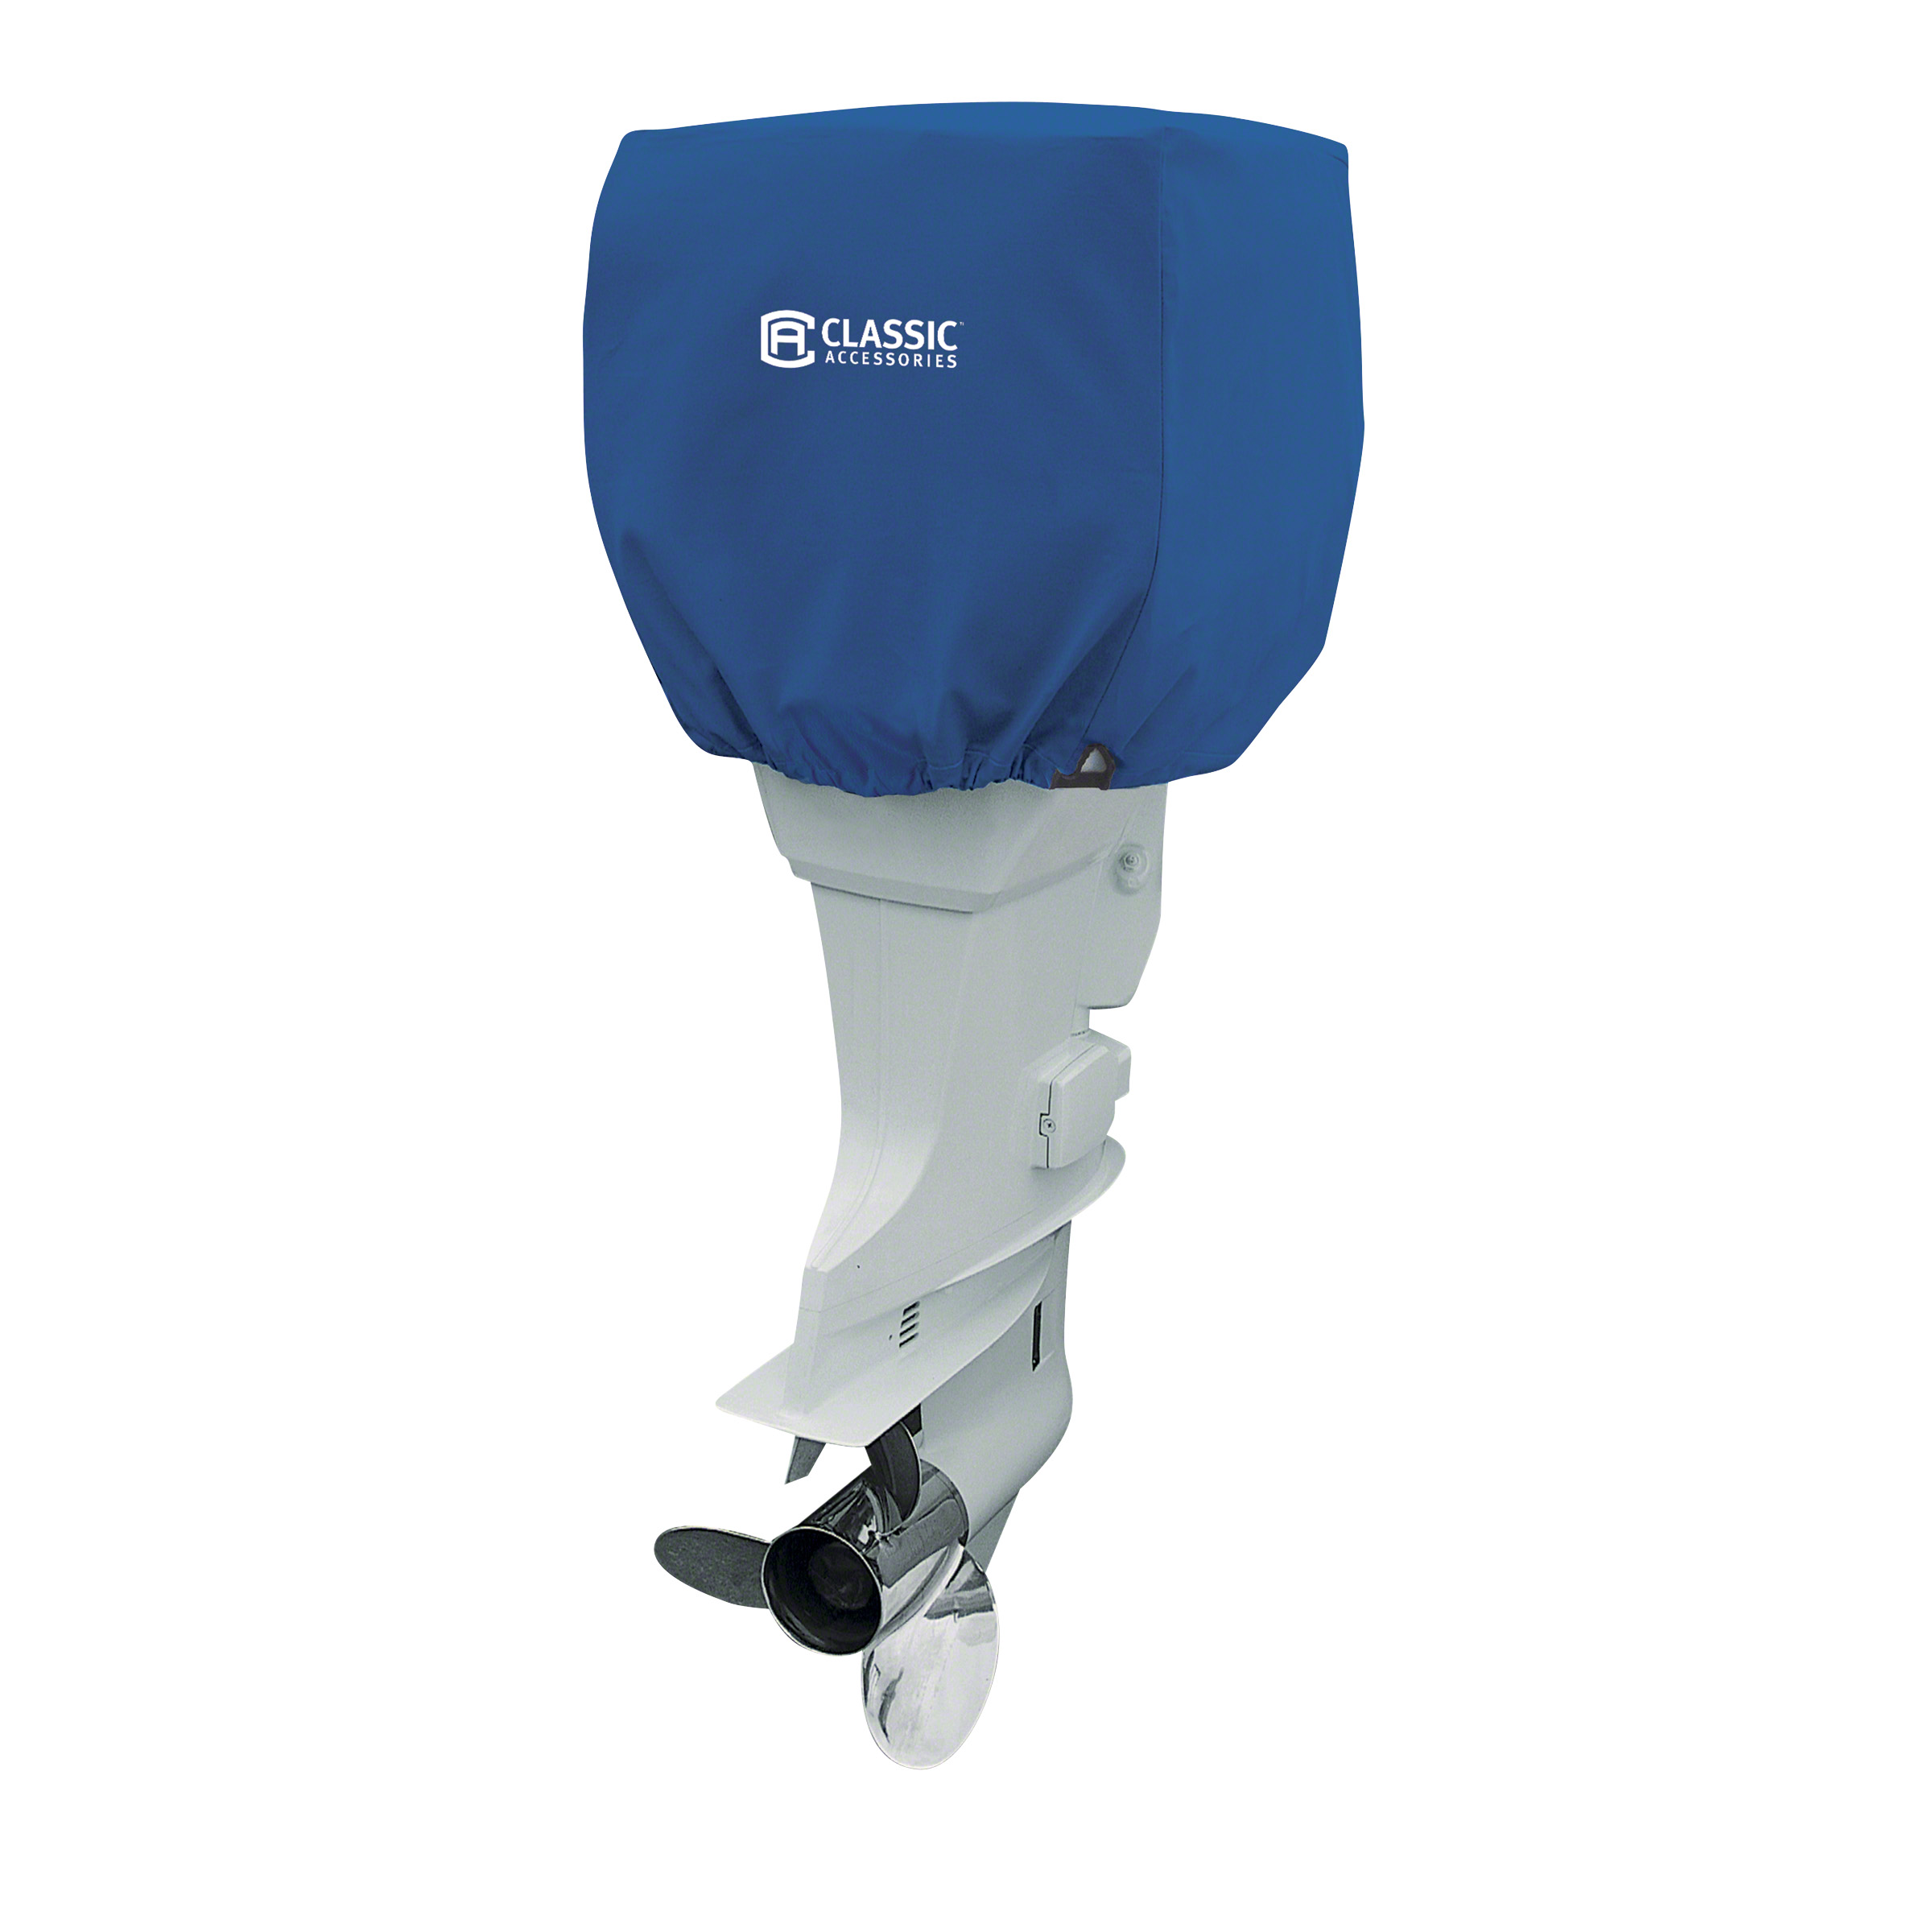 Classic Accessories Stellex™ Trailerable Outboard Motor Cover, 25-50 H.P. Motors - image 1 of 5